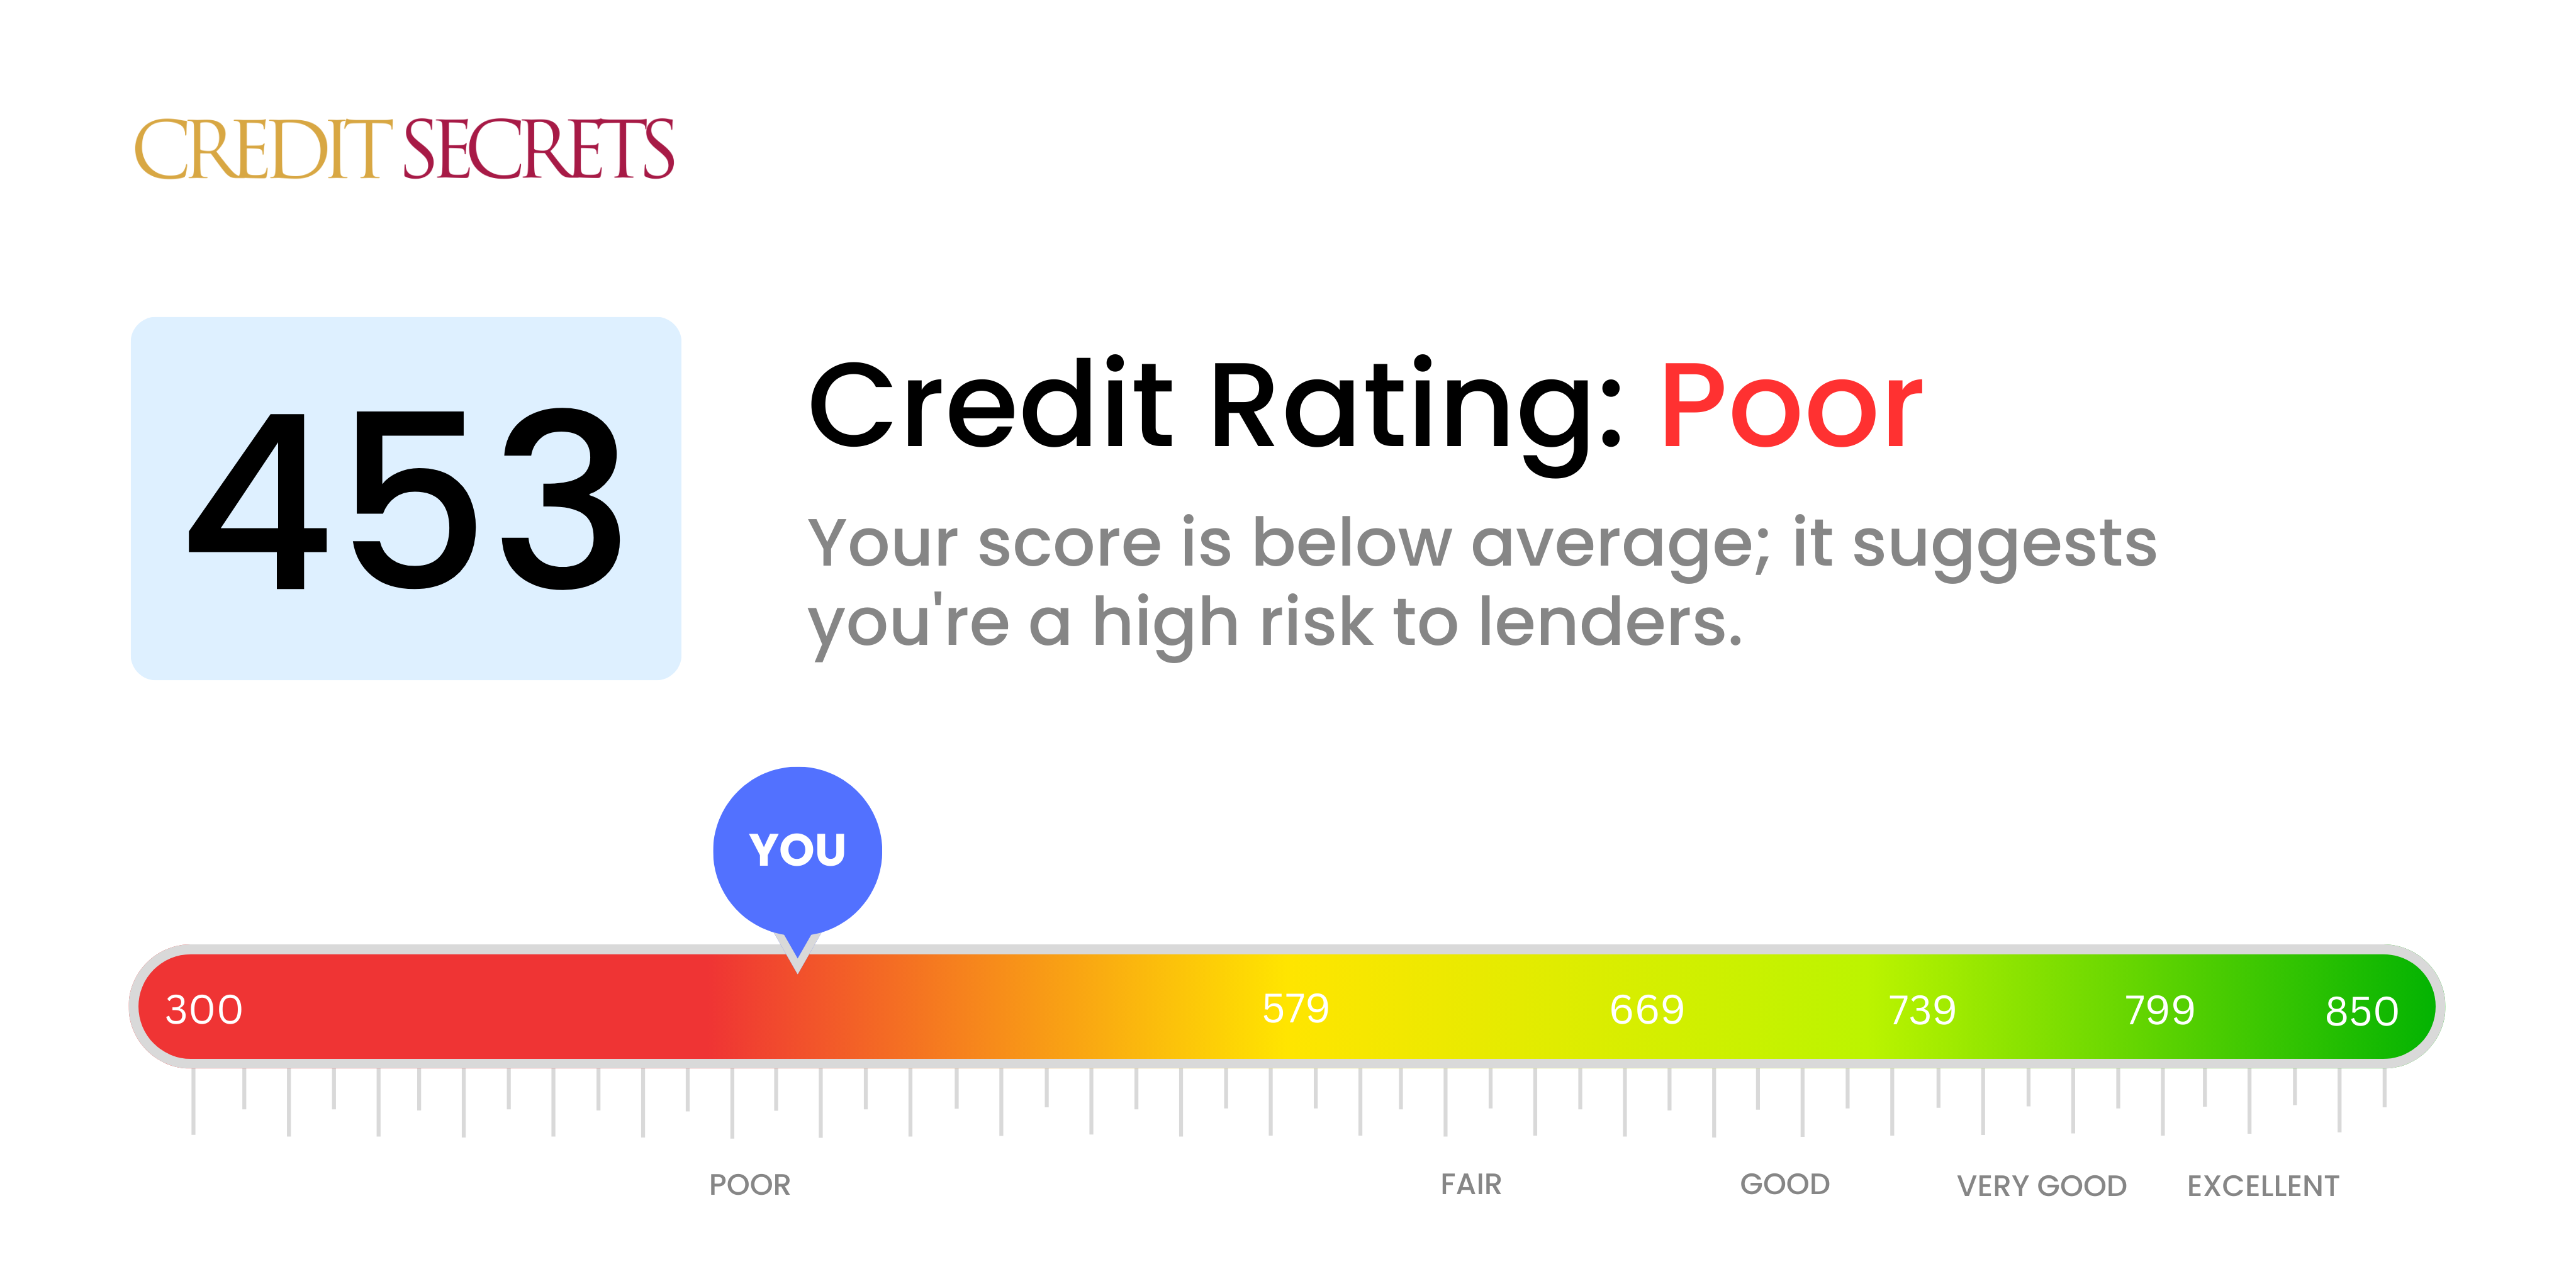 Is 453 a good credit score?